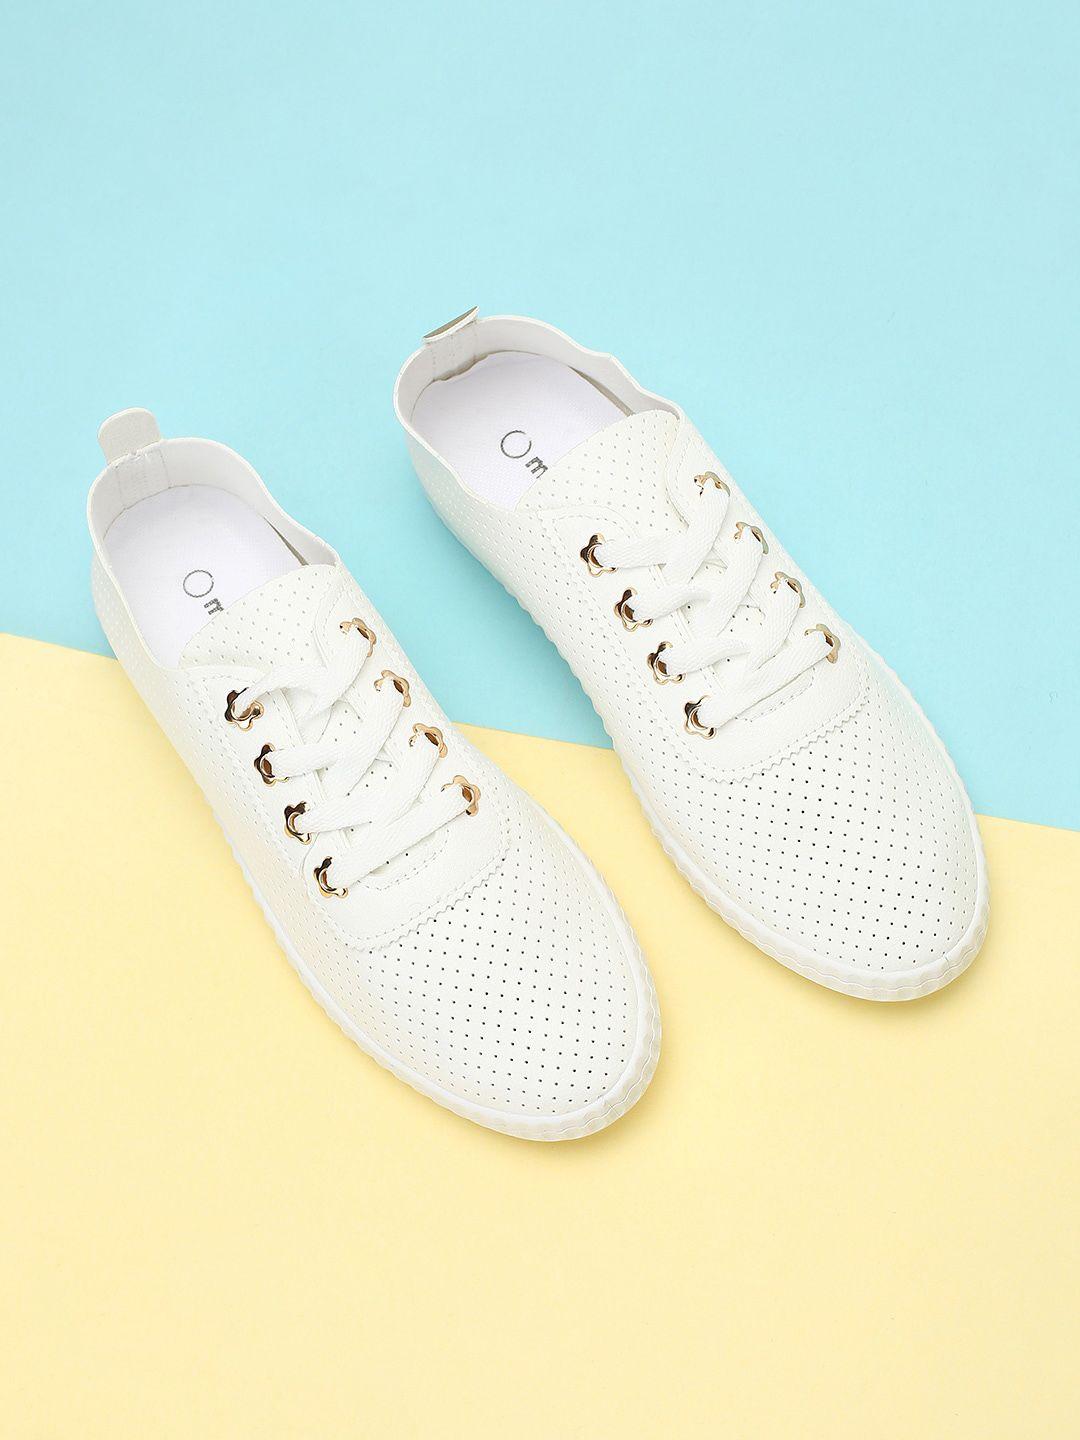 max women perforated sneakers